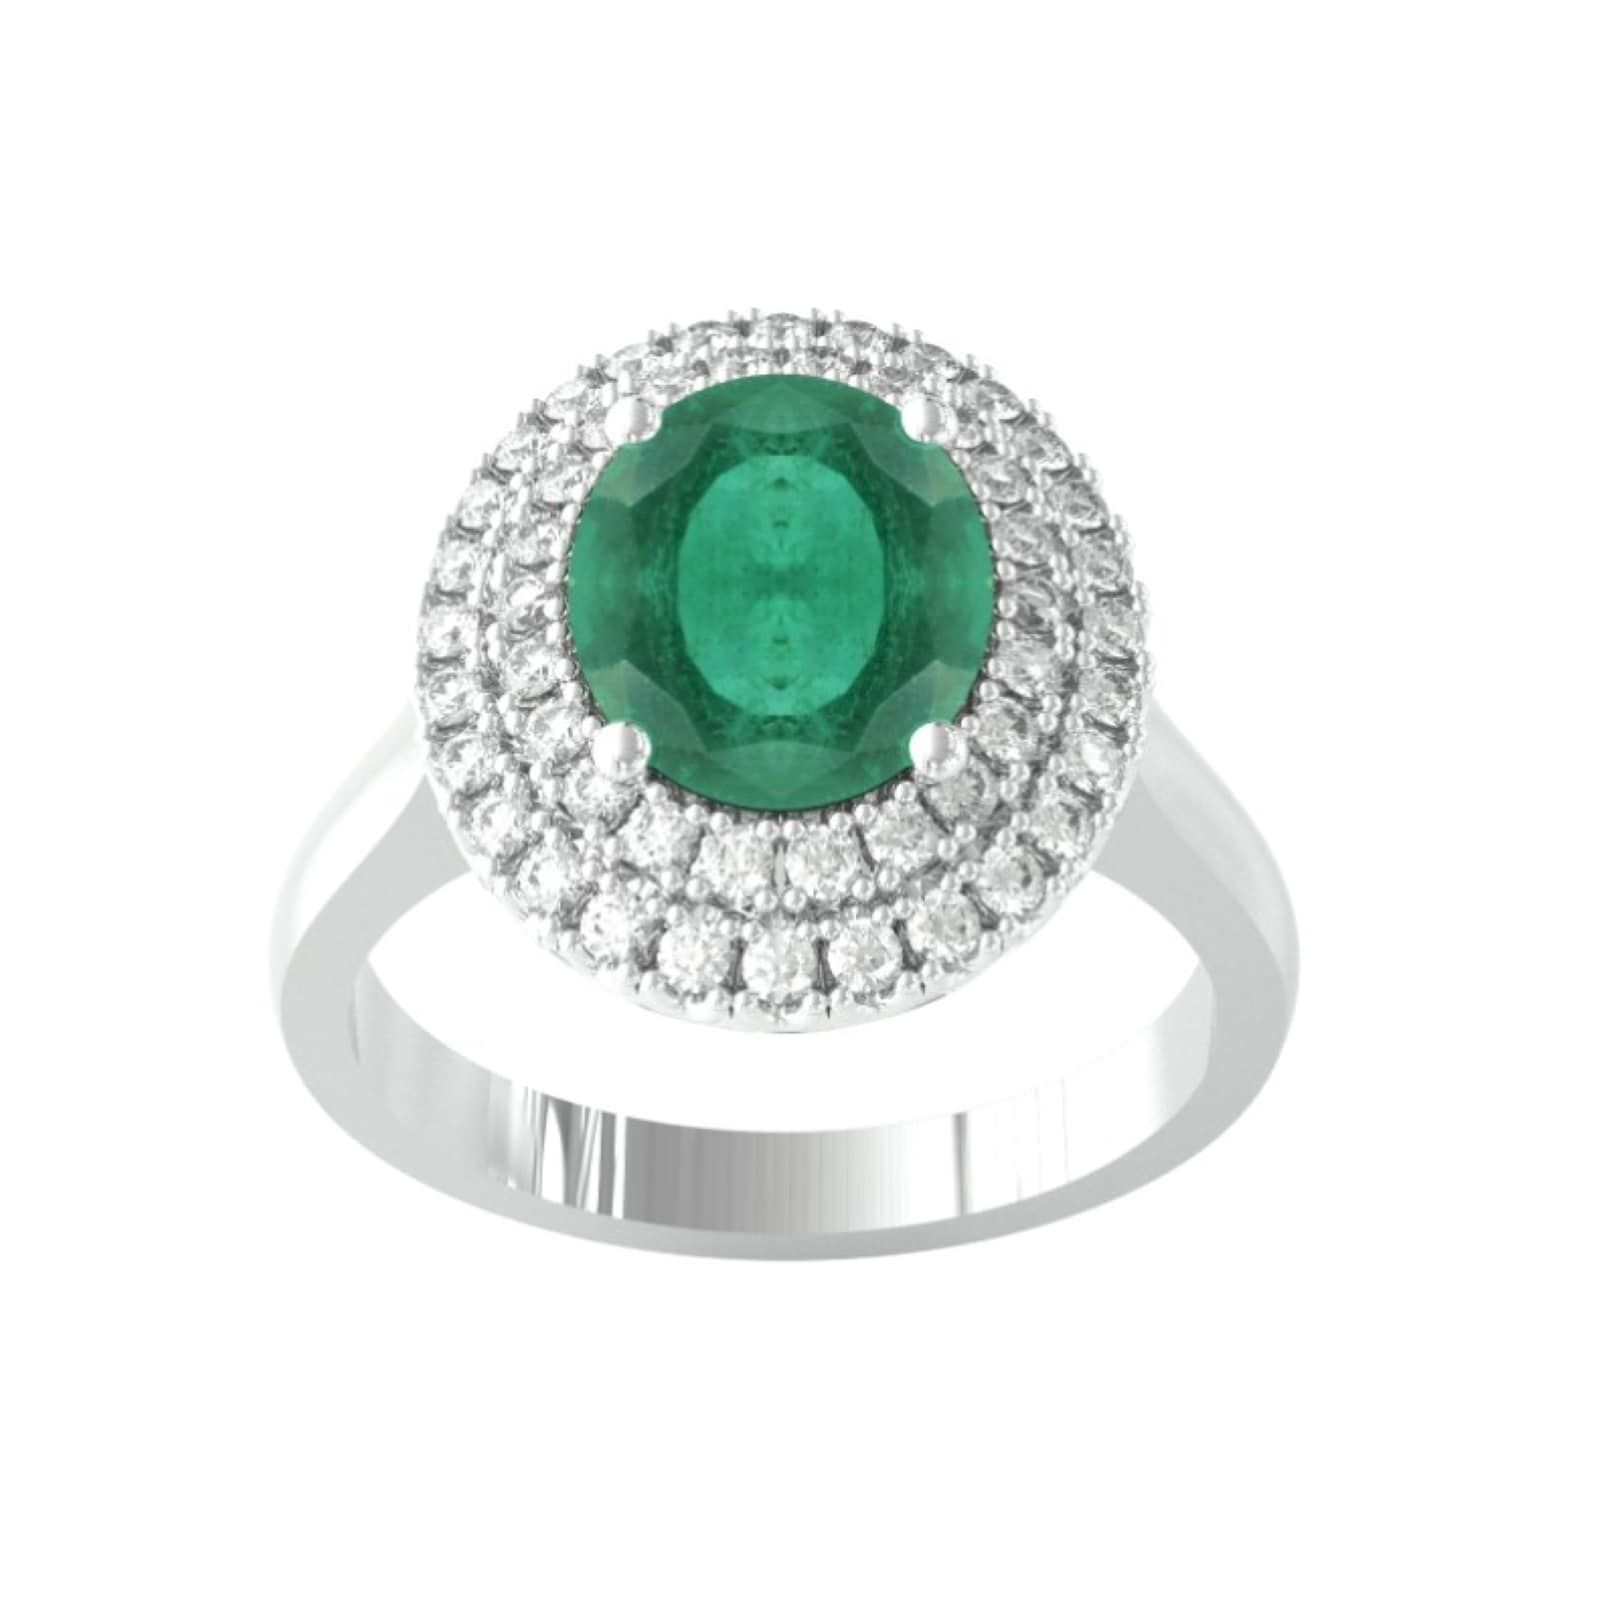 18ct White Gold Emerald & Diamond Double Halo Cluster Ring - Ring Size E.5